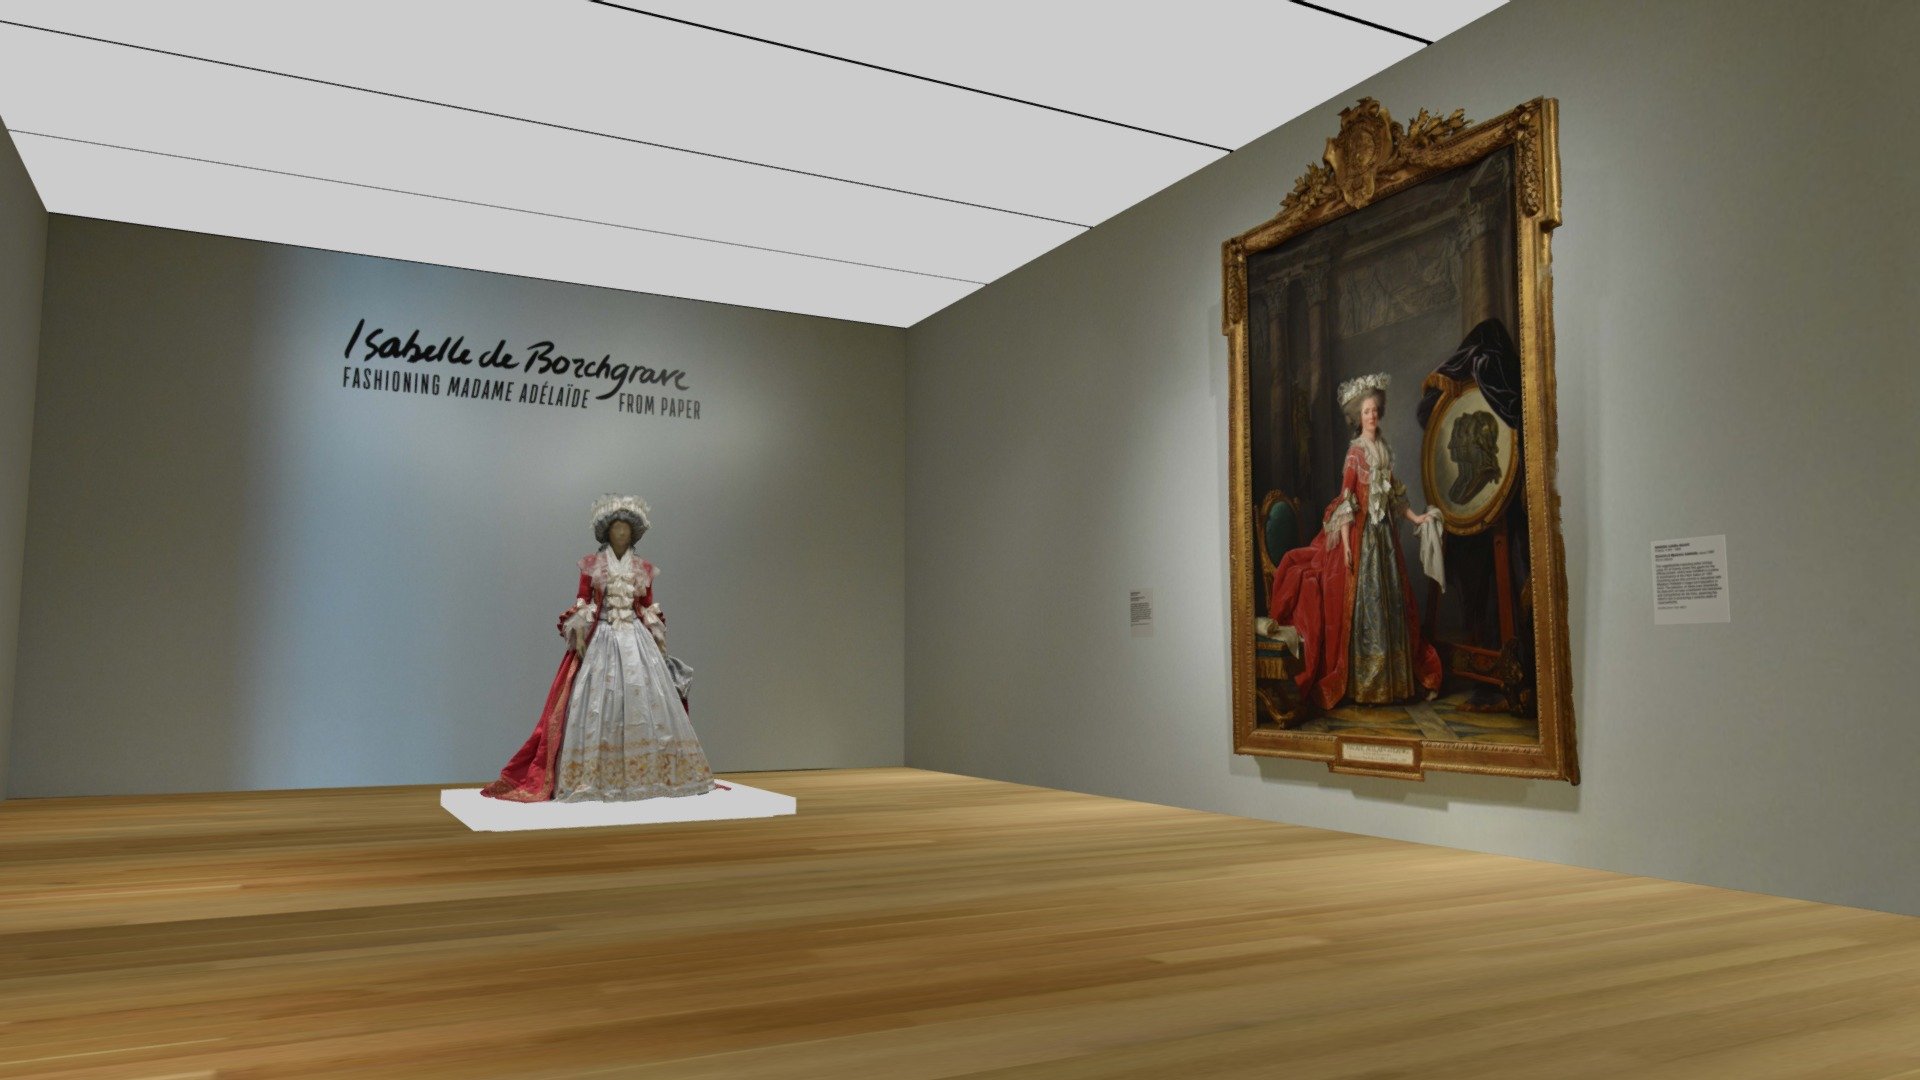 This is a digitized section of the &ldquo;Isabelle de Borchgrave: Fashioning Art from Paper